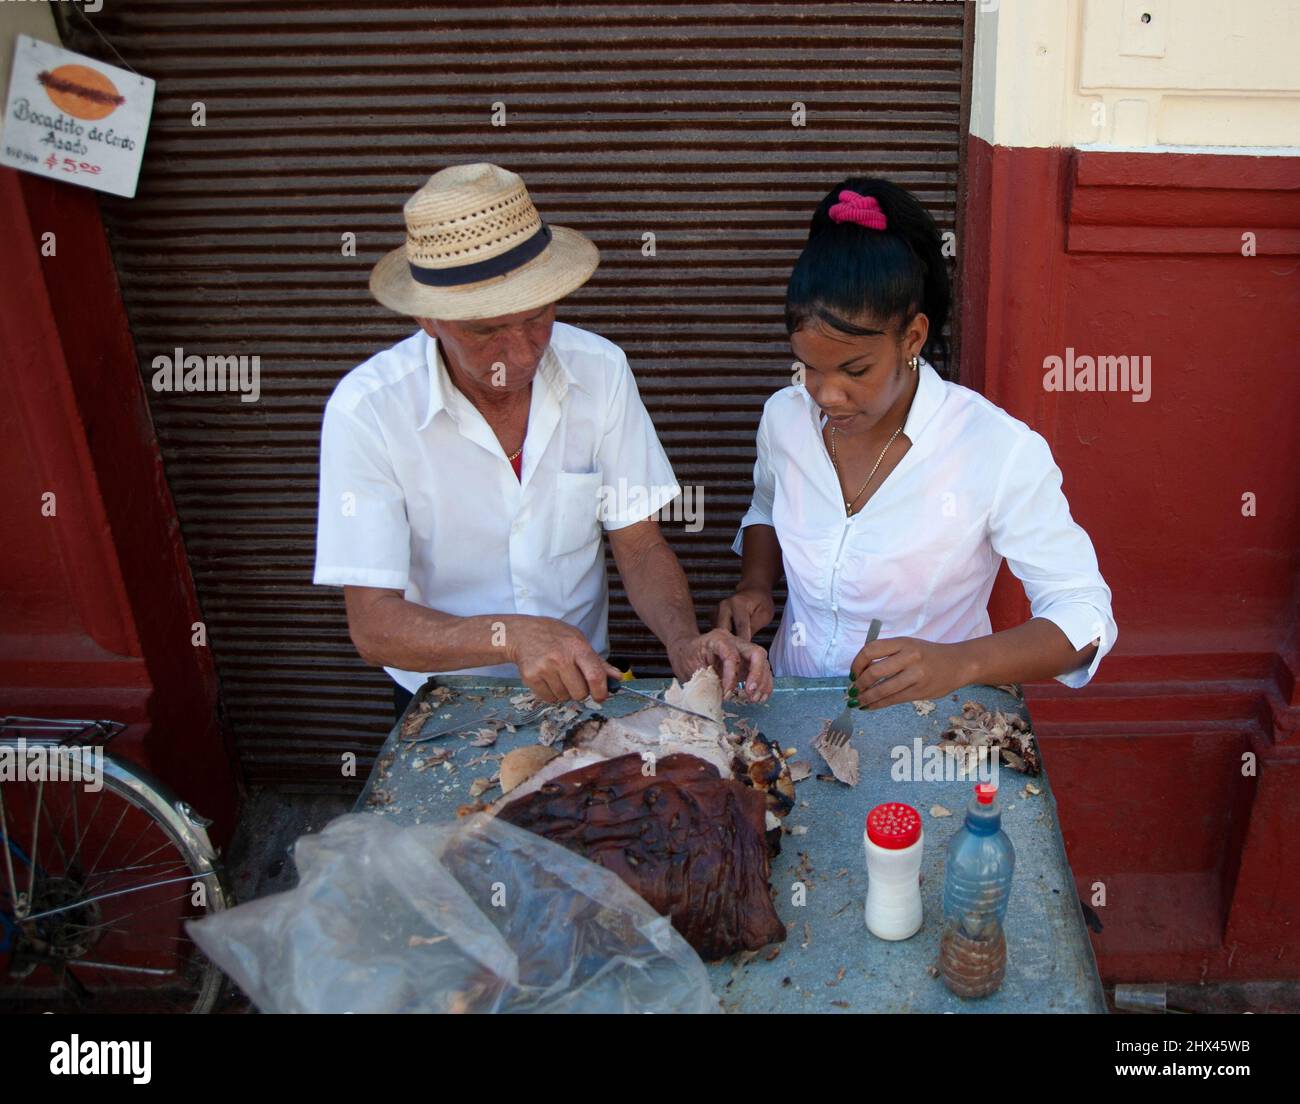 Chef wearing a fedora hat, prepares food with a waitress at an eatery in Havana, Cuba Stock Photo